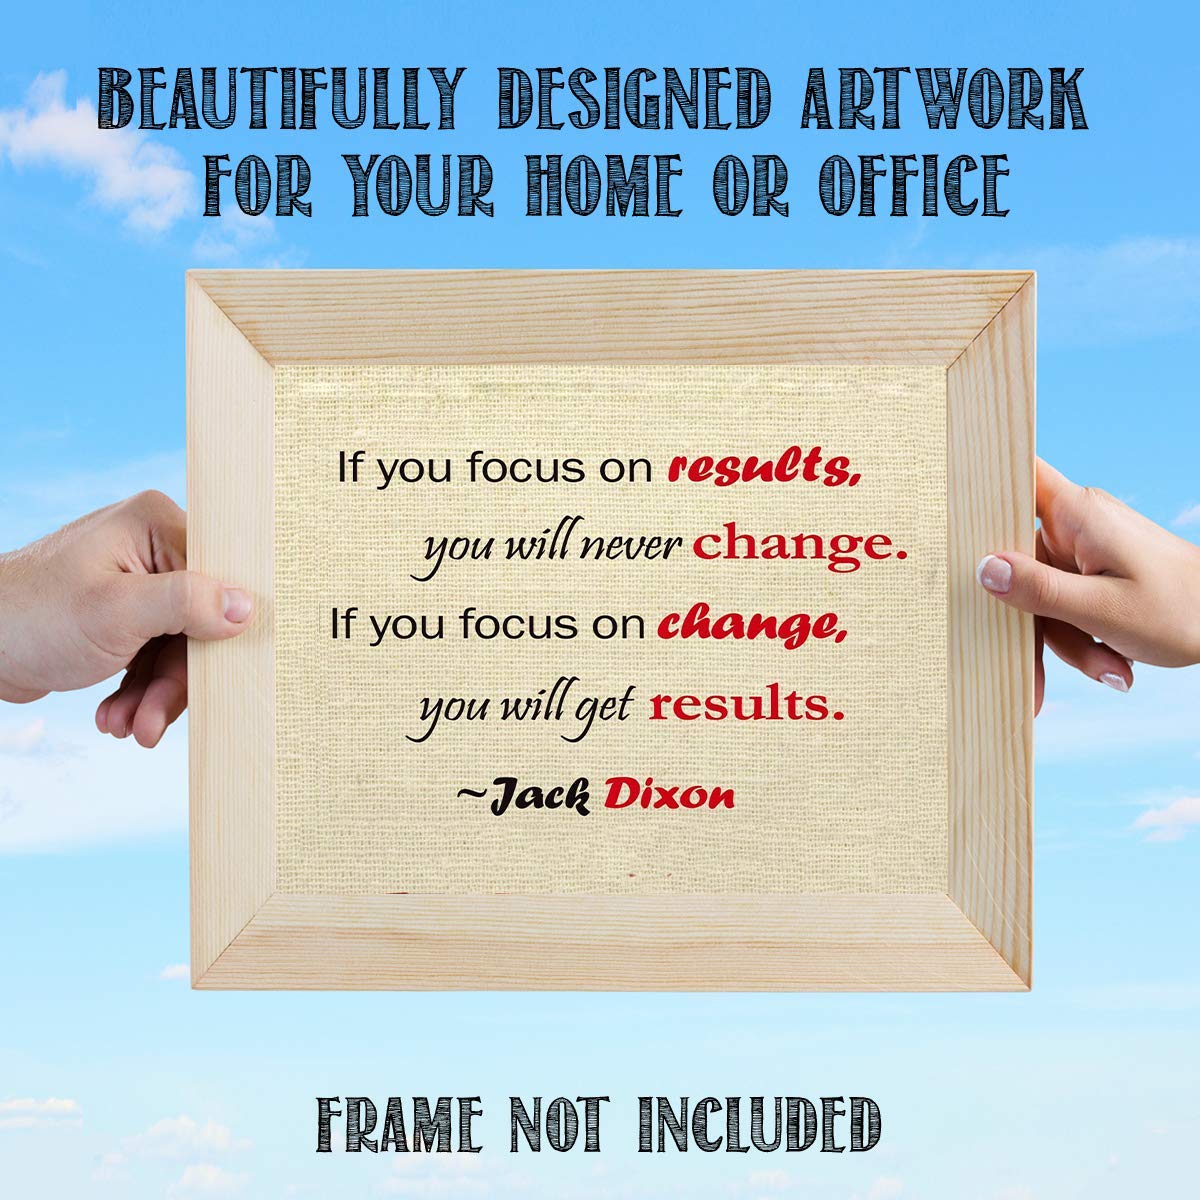 Focus On Change- You Will Get Results- 10 x 8" Motivational Quotes Wall Art by Jack Dixon. Typographic Poster Print-Ready to Frame. Ideal for Home-School-Gym-Office D?cor. Inspire Your Team.